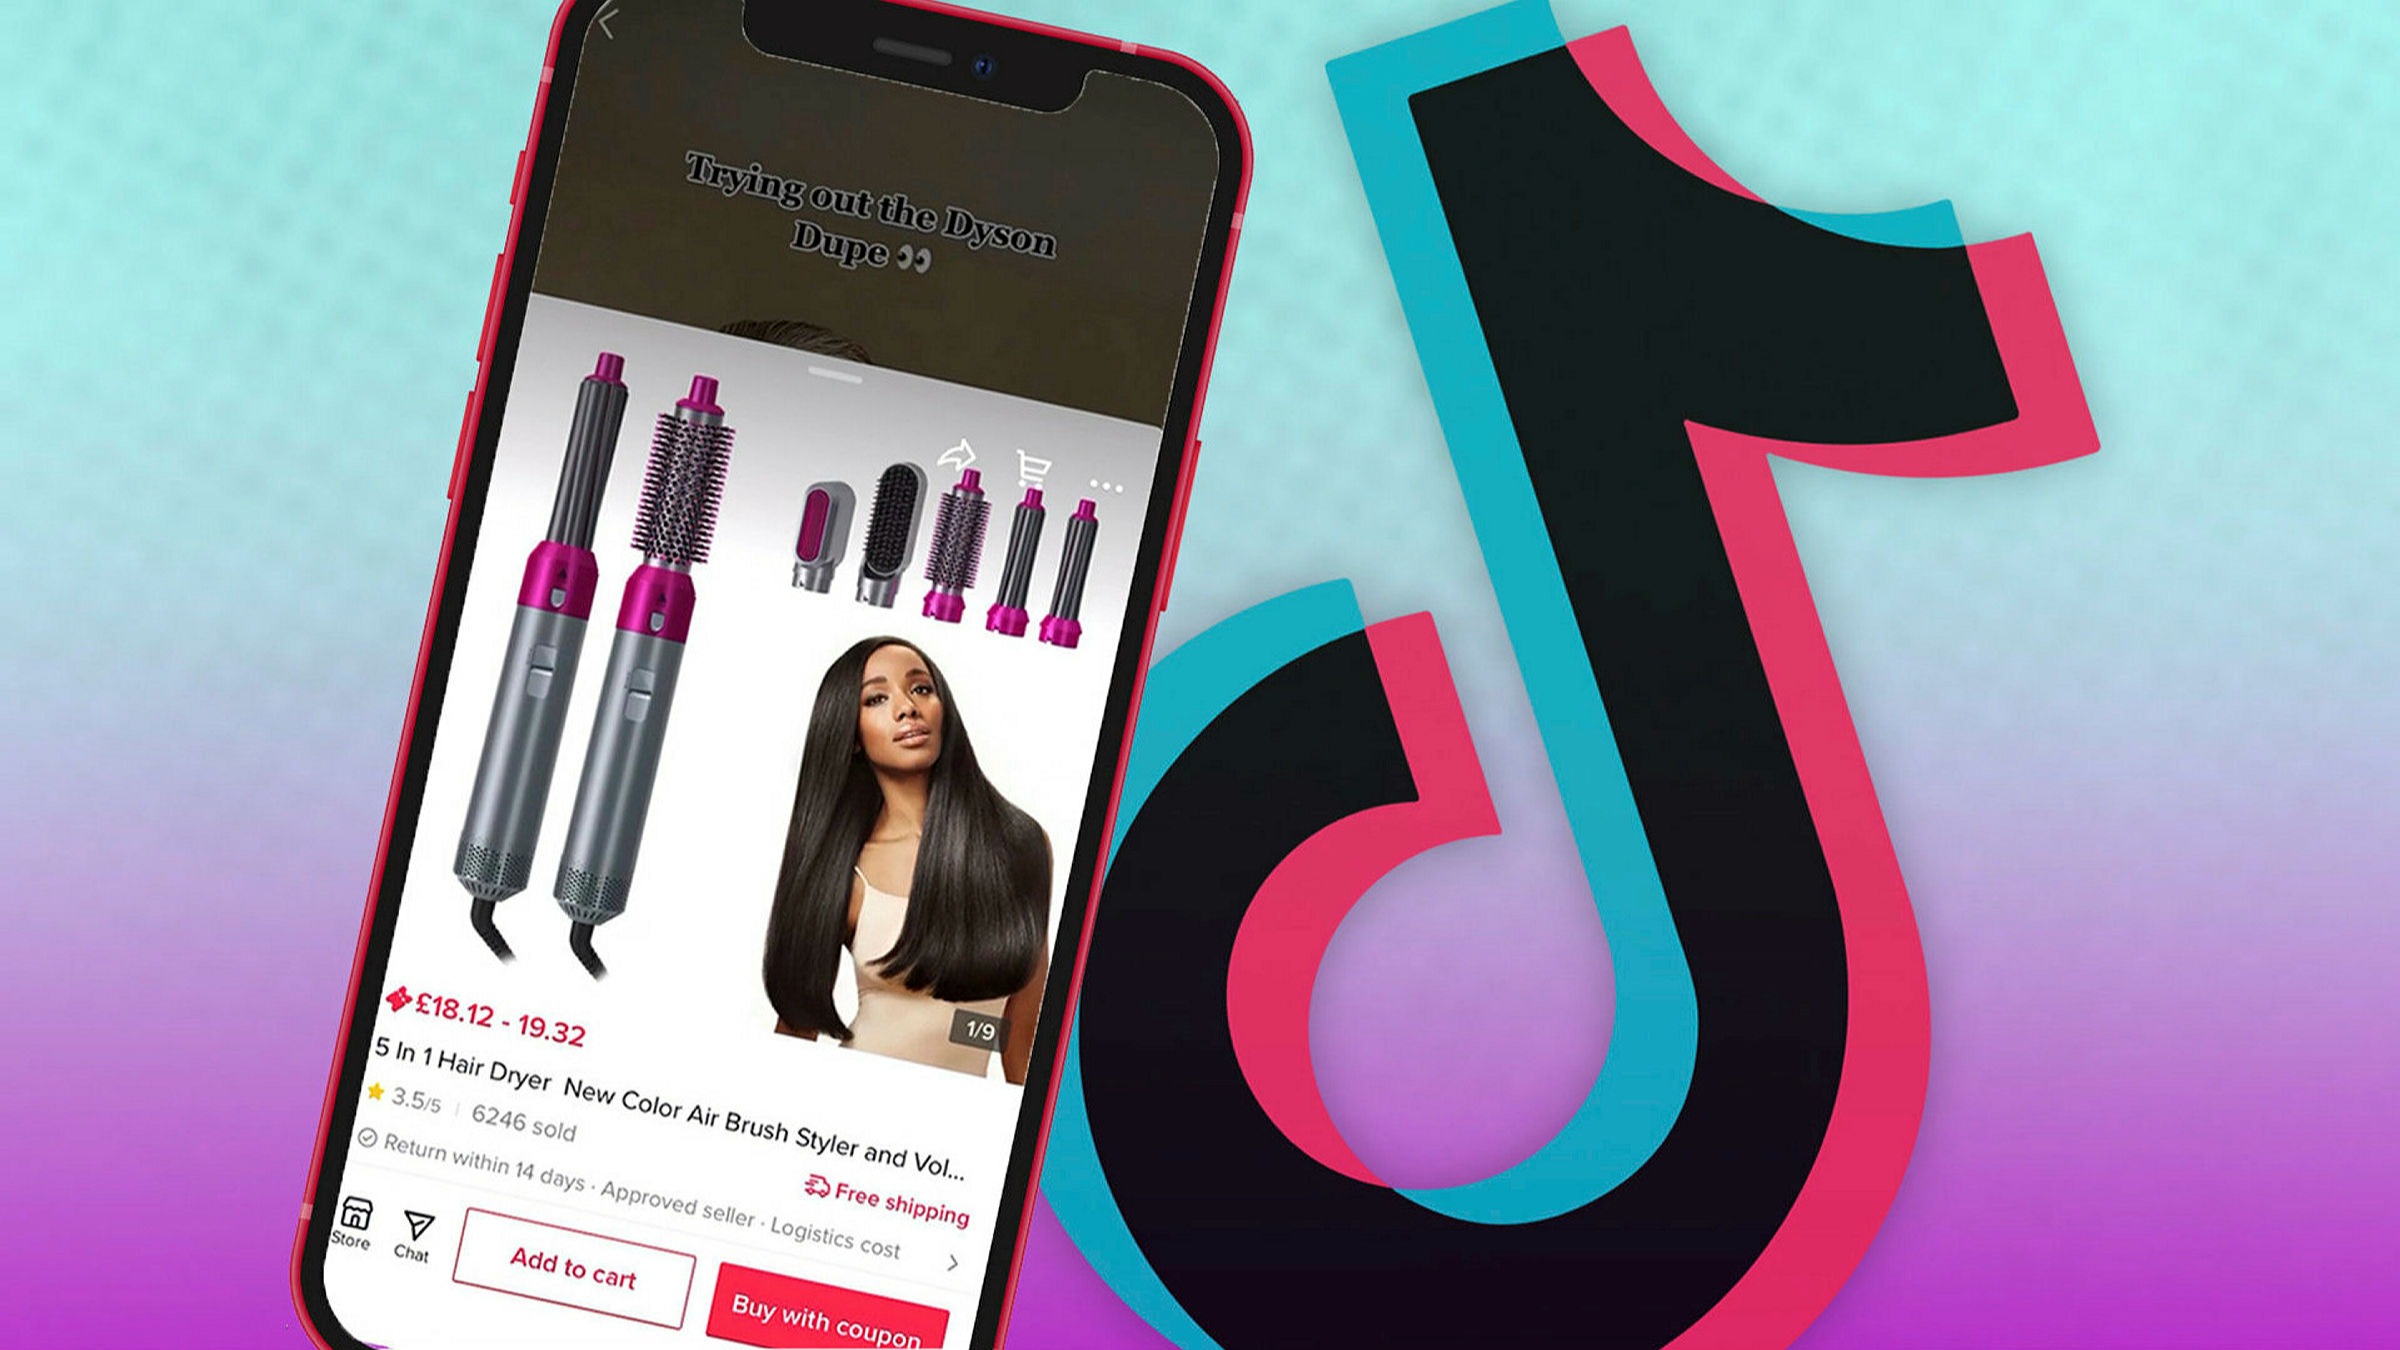 TikTok Shop is a preferred platform for purchases among adult Gen Z consumers.